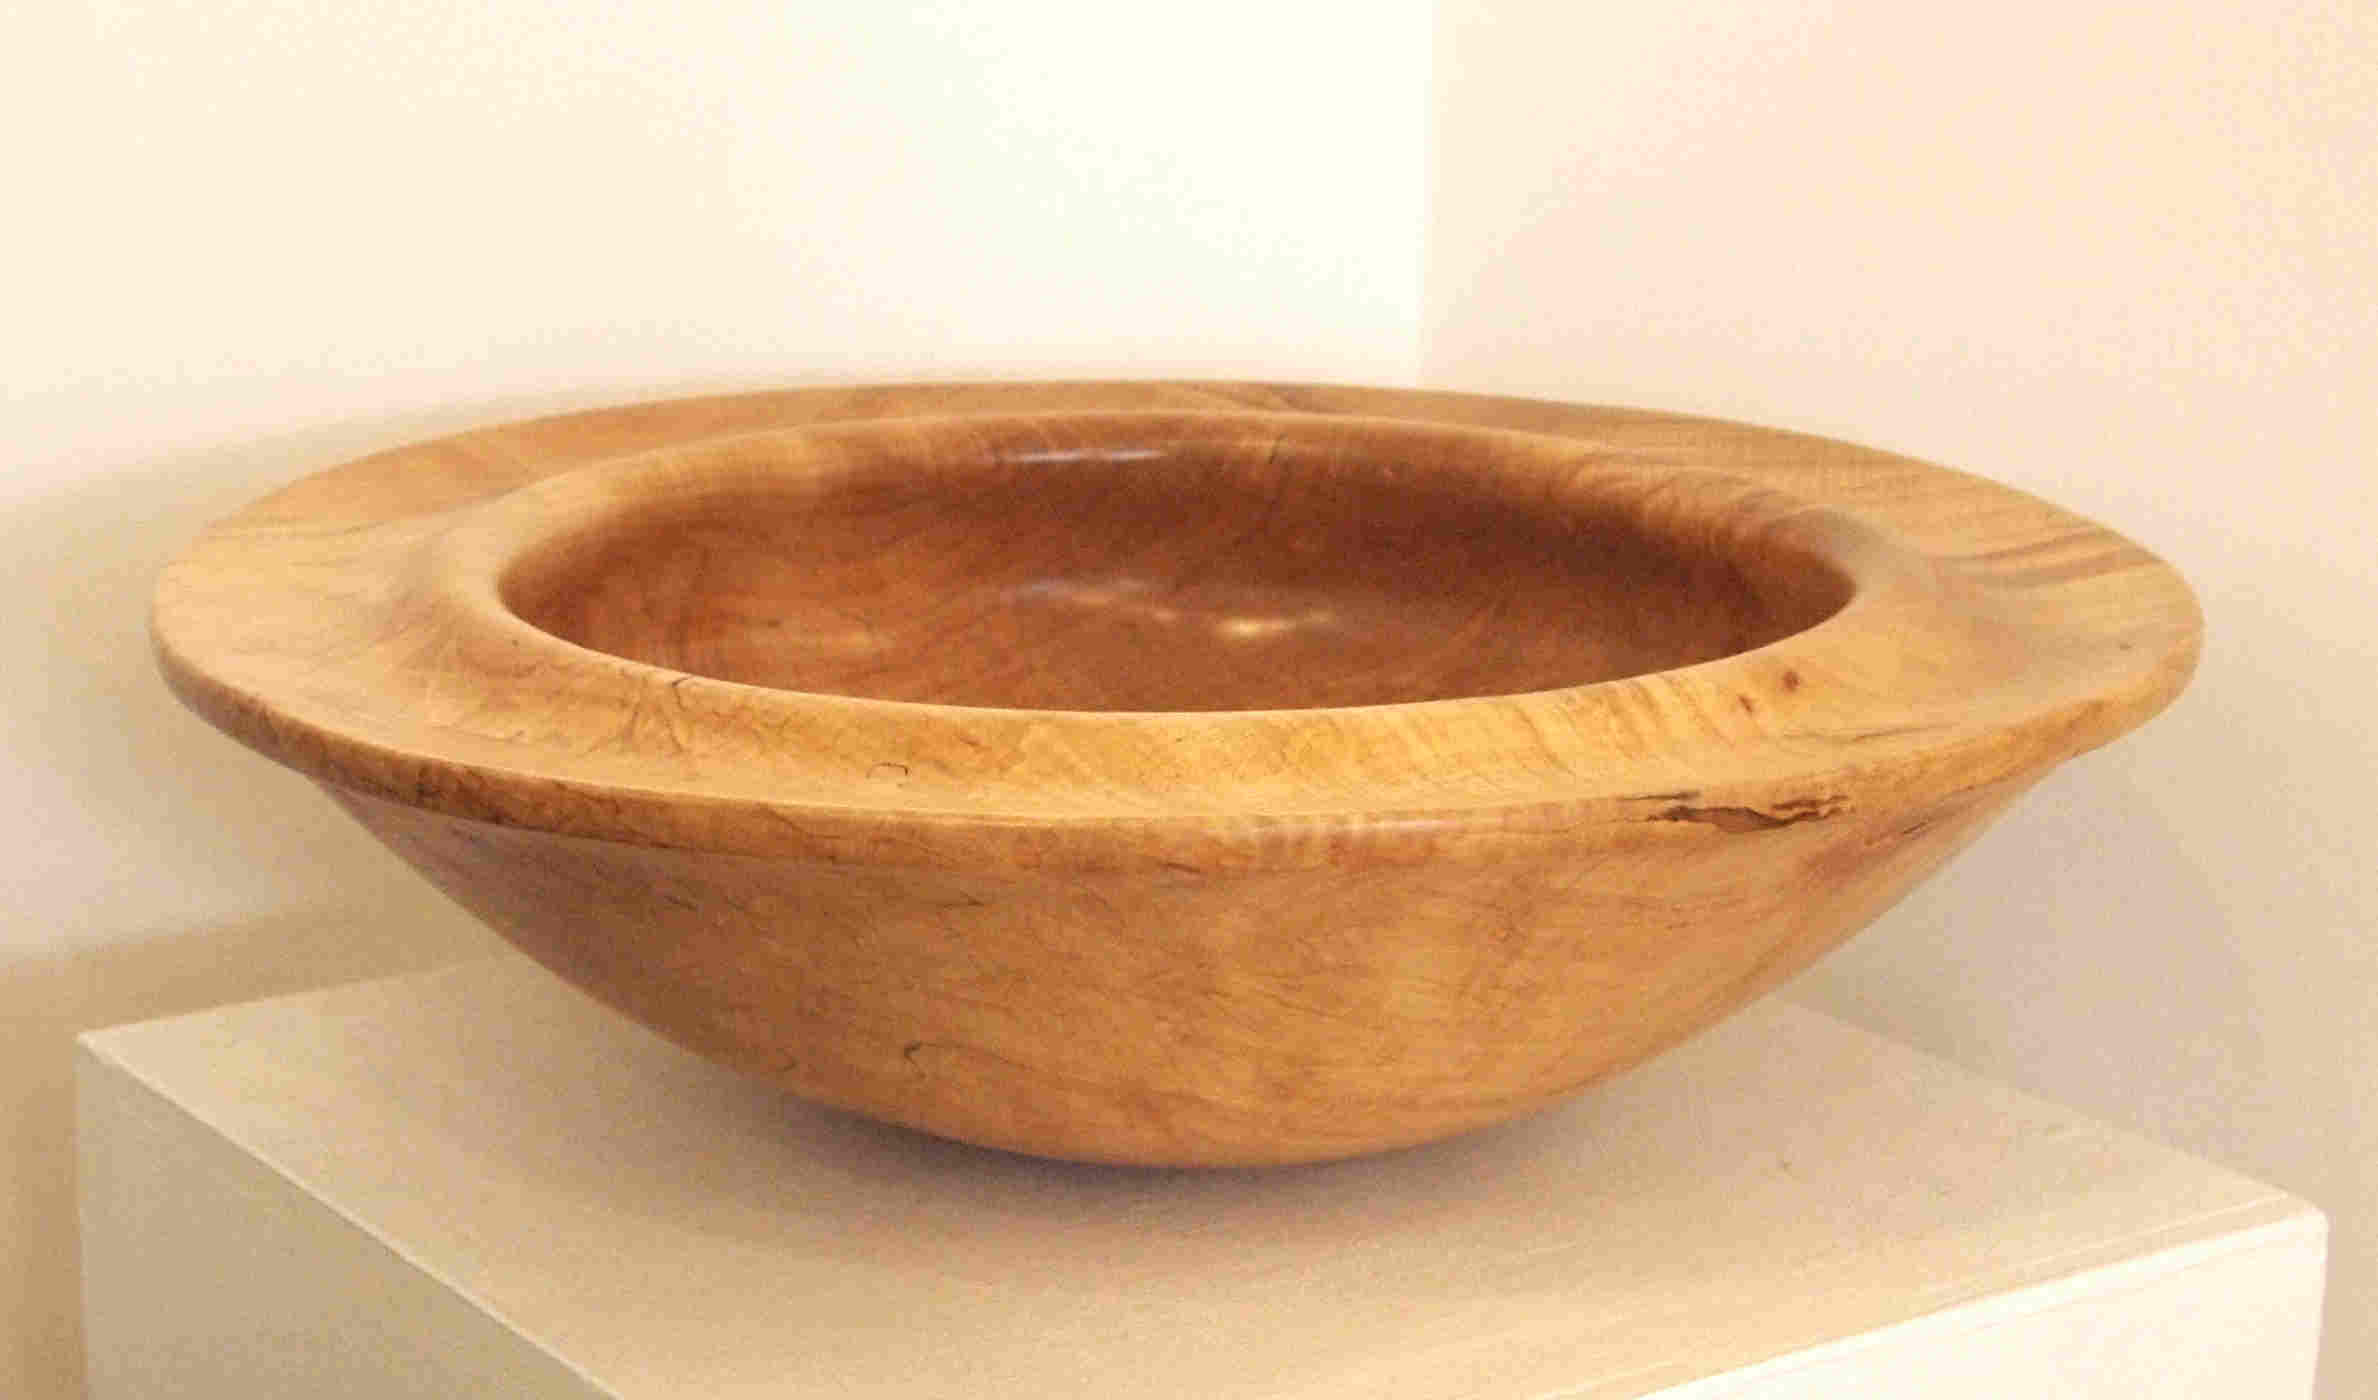 'Spalted Sycamore Bowl III' by artist Angus Clyne